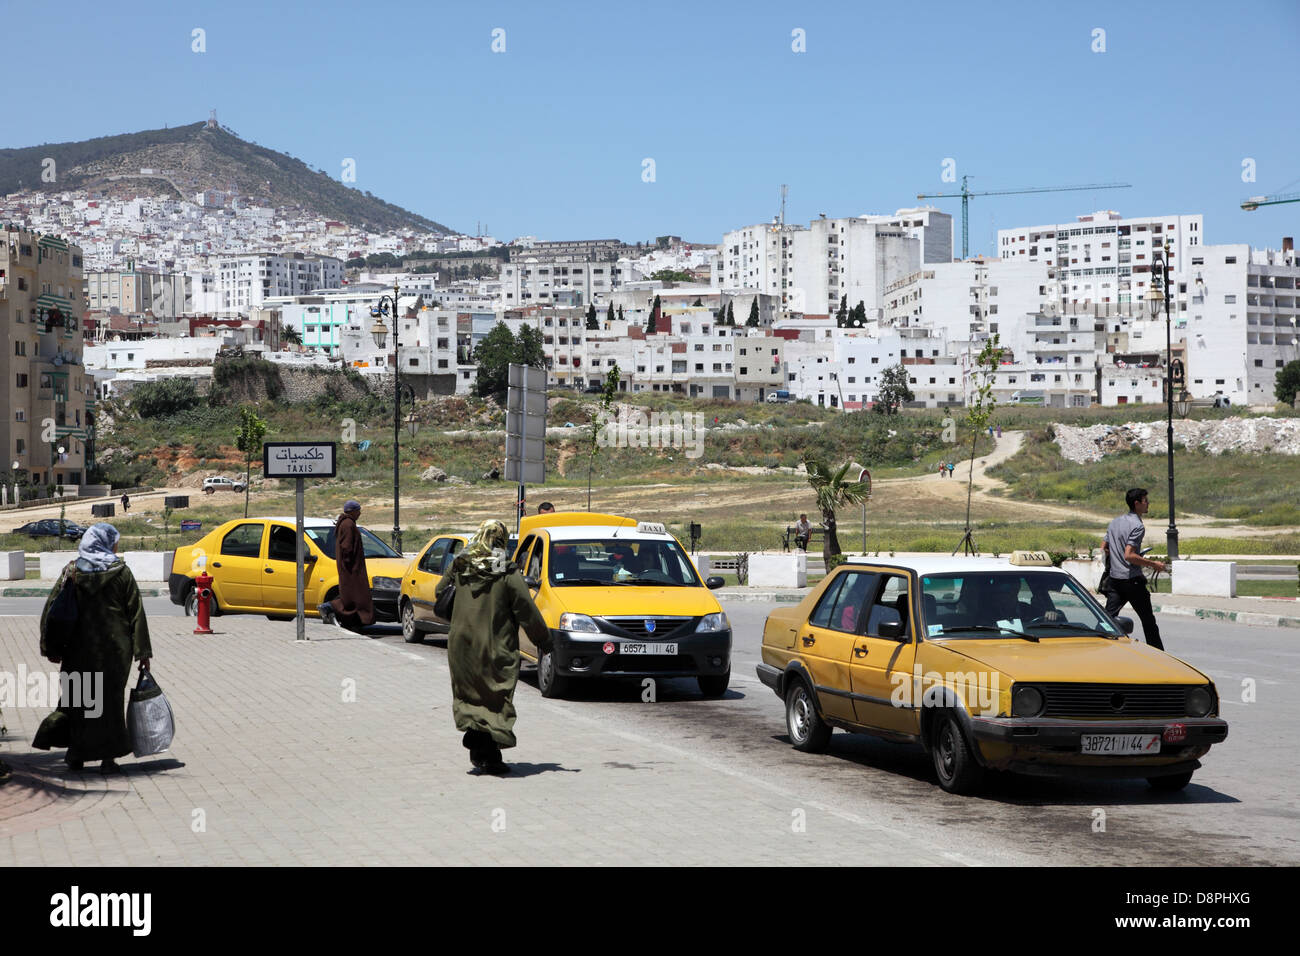 Taxis at the bus station in Tetouan, Morocco Stock Photo